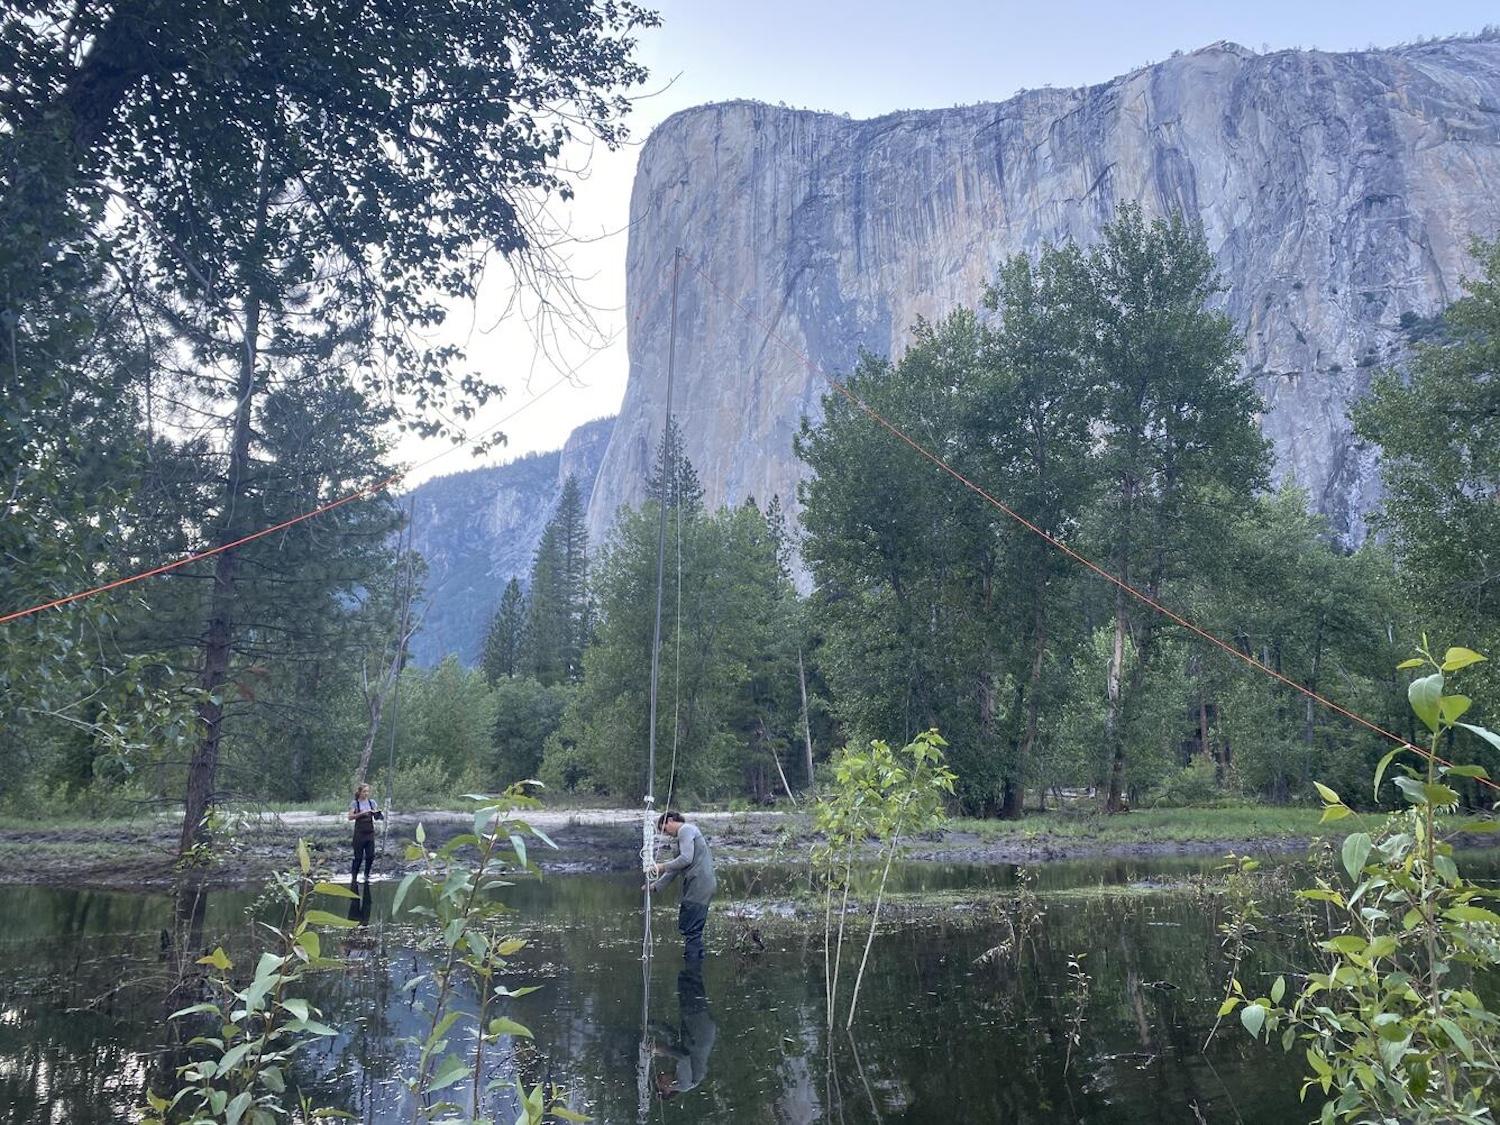 Biologists set up a triple-high mist net to capture bats with El Capitan, one of Yosemite's most iconic rock formations, in the background, as part of a study to track bats in Yosemite.